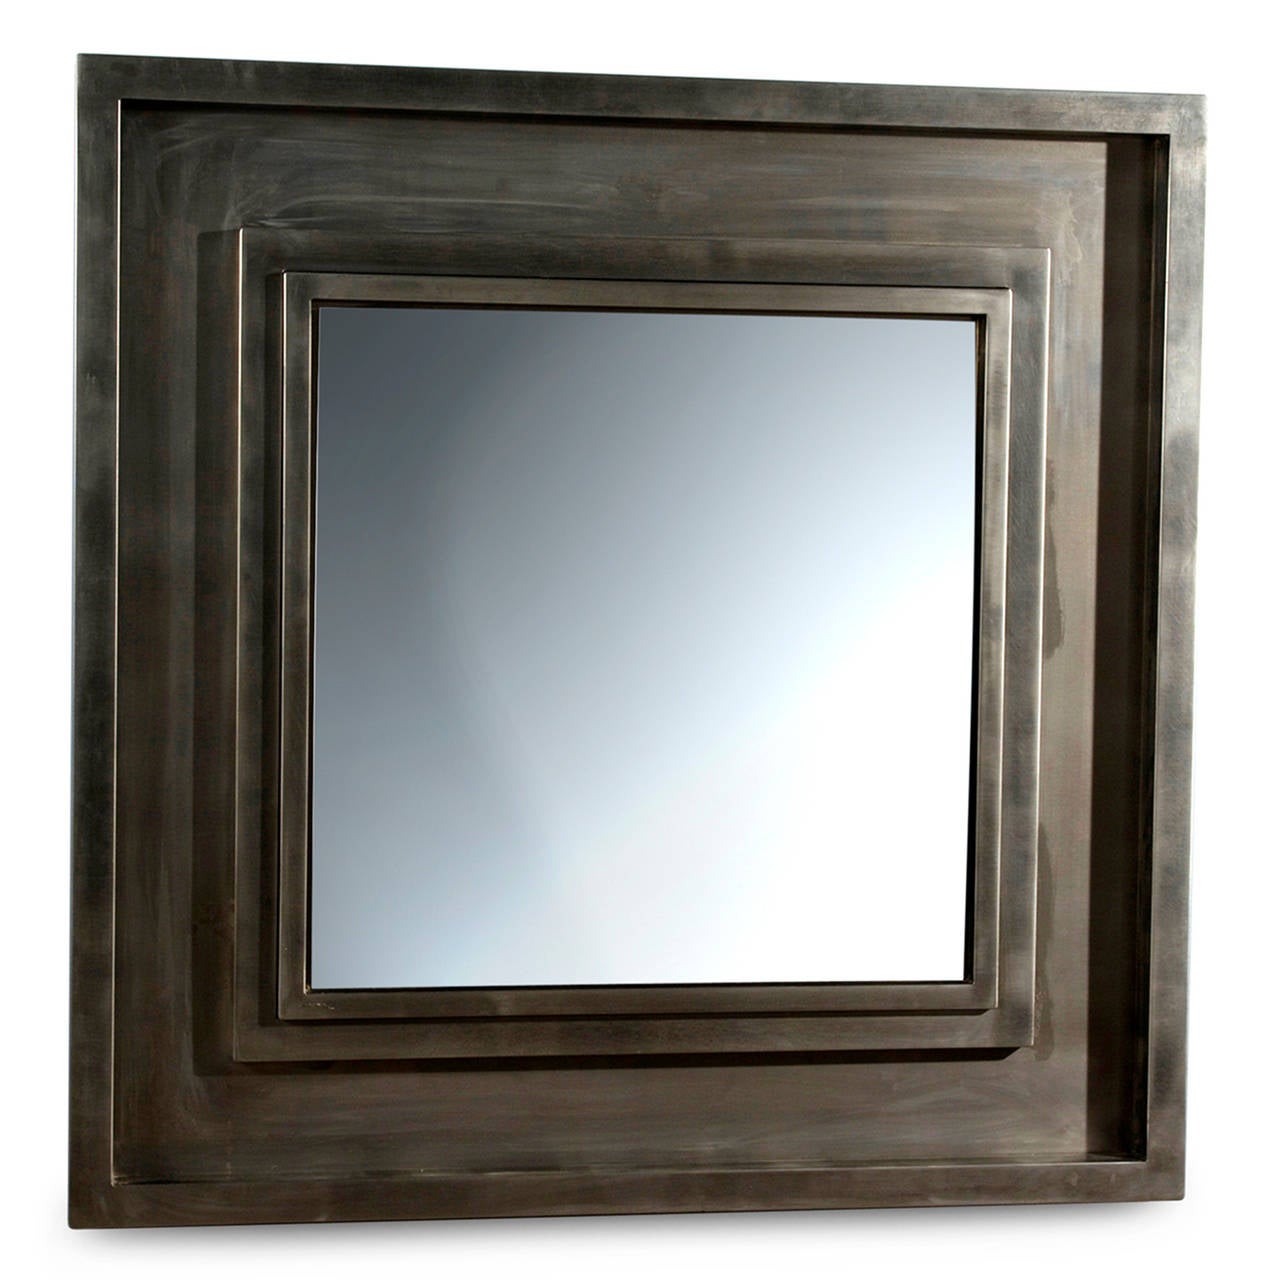 1970s French Brushed Steel Frame Mirror 1